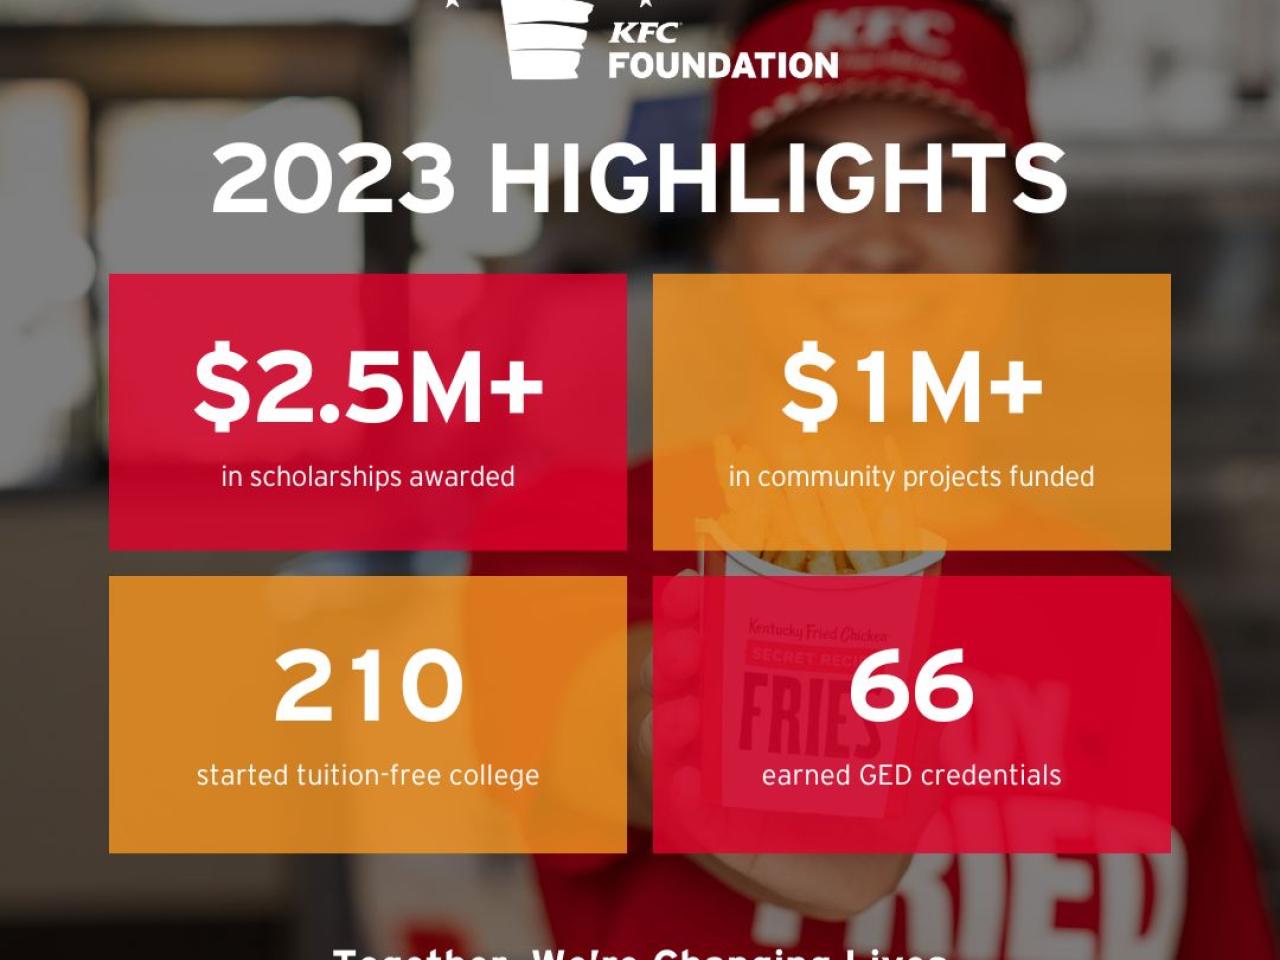 "2023 Highlights" and four boxes with statistics. KFC logo at the top. "Together, We're changing lives."